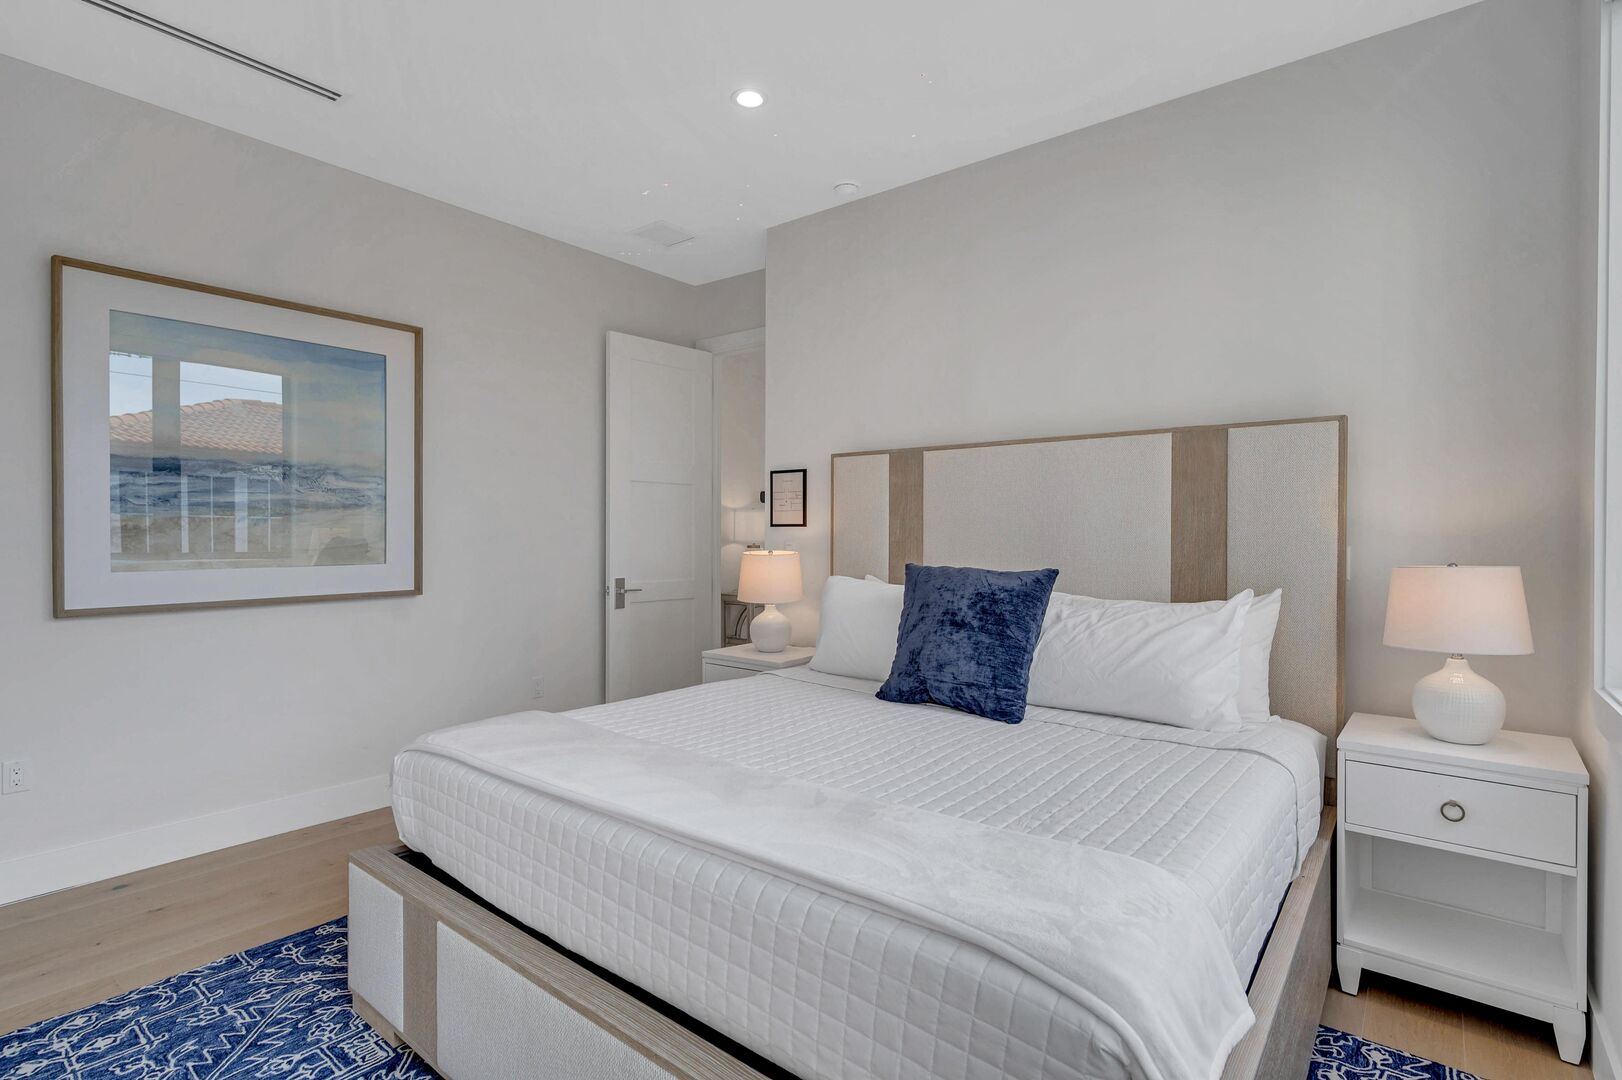 Bedroom Two is located on the third floor featuring a king size bed an ensuite bathroom.